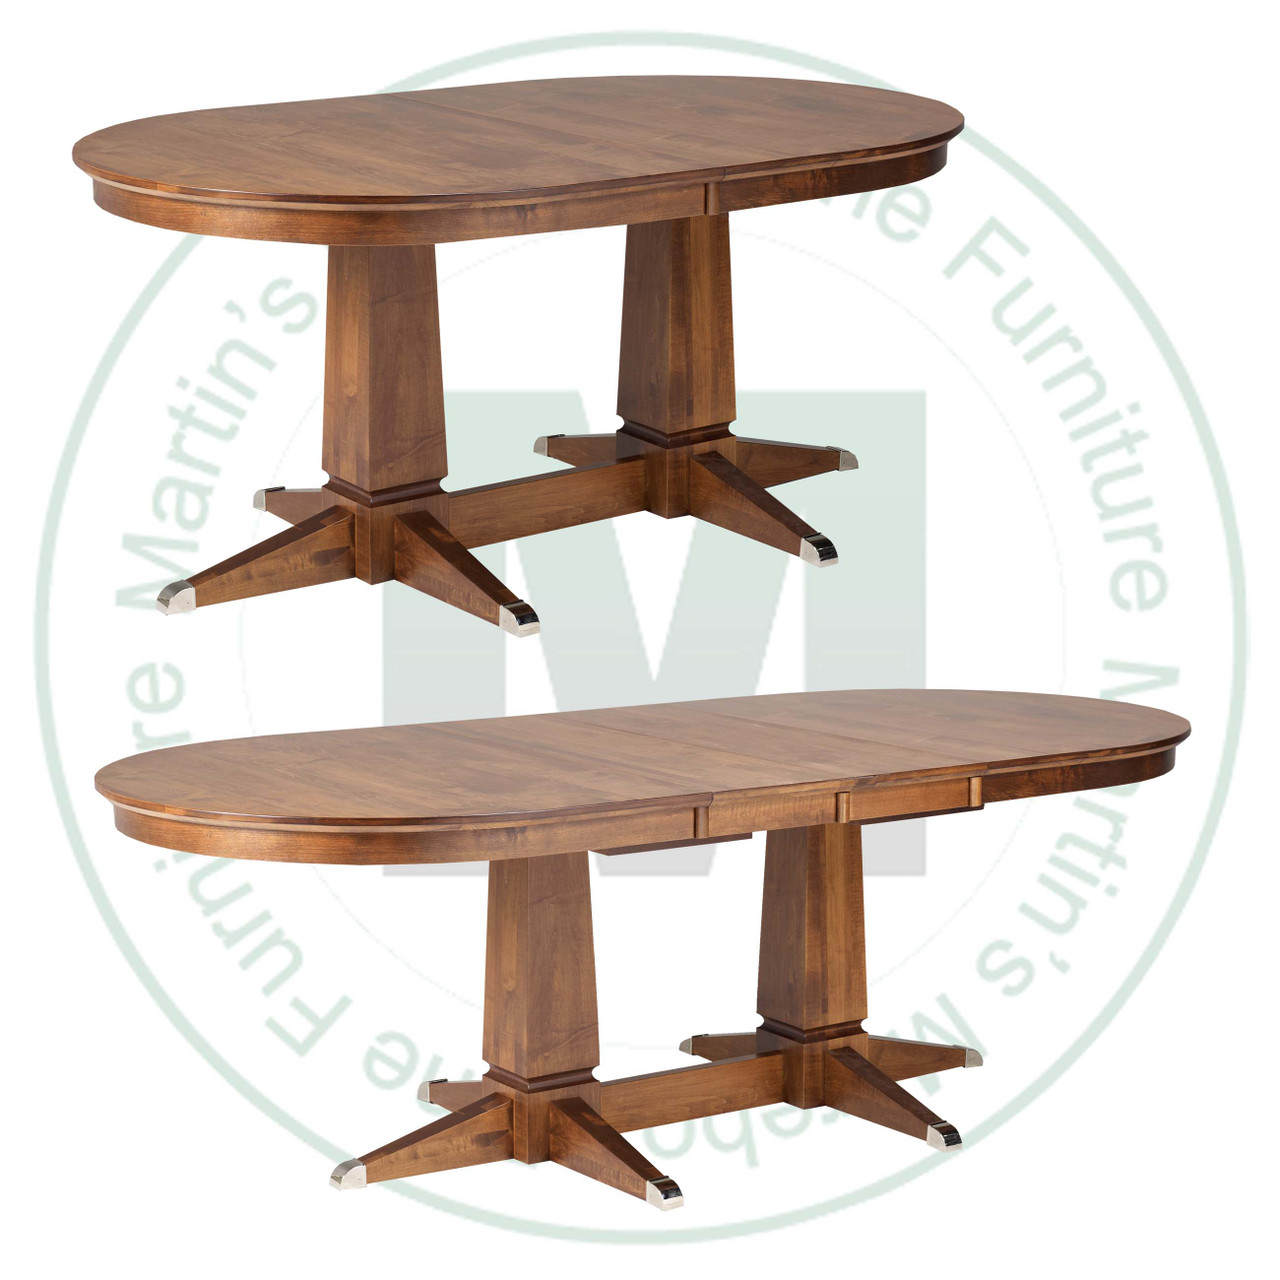 Maple Sweden Double Pedestal Table 48''D x 96''W x 30''H With 4 - 12'' Leaves